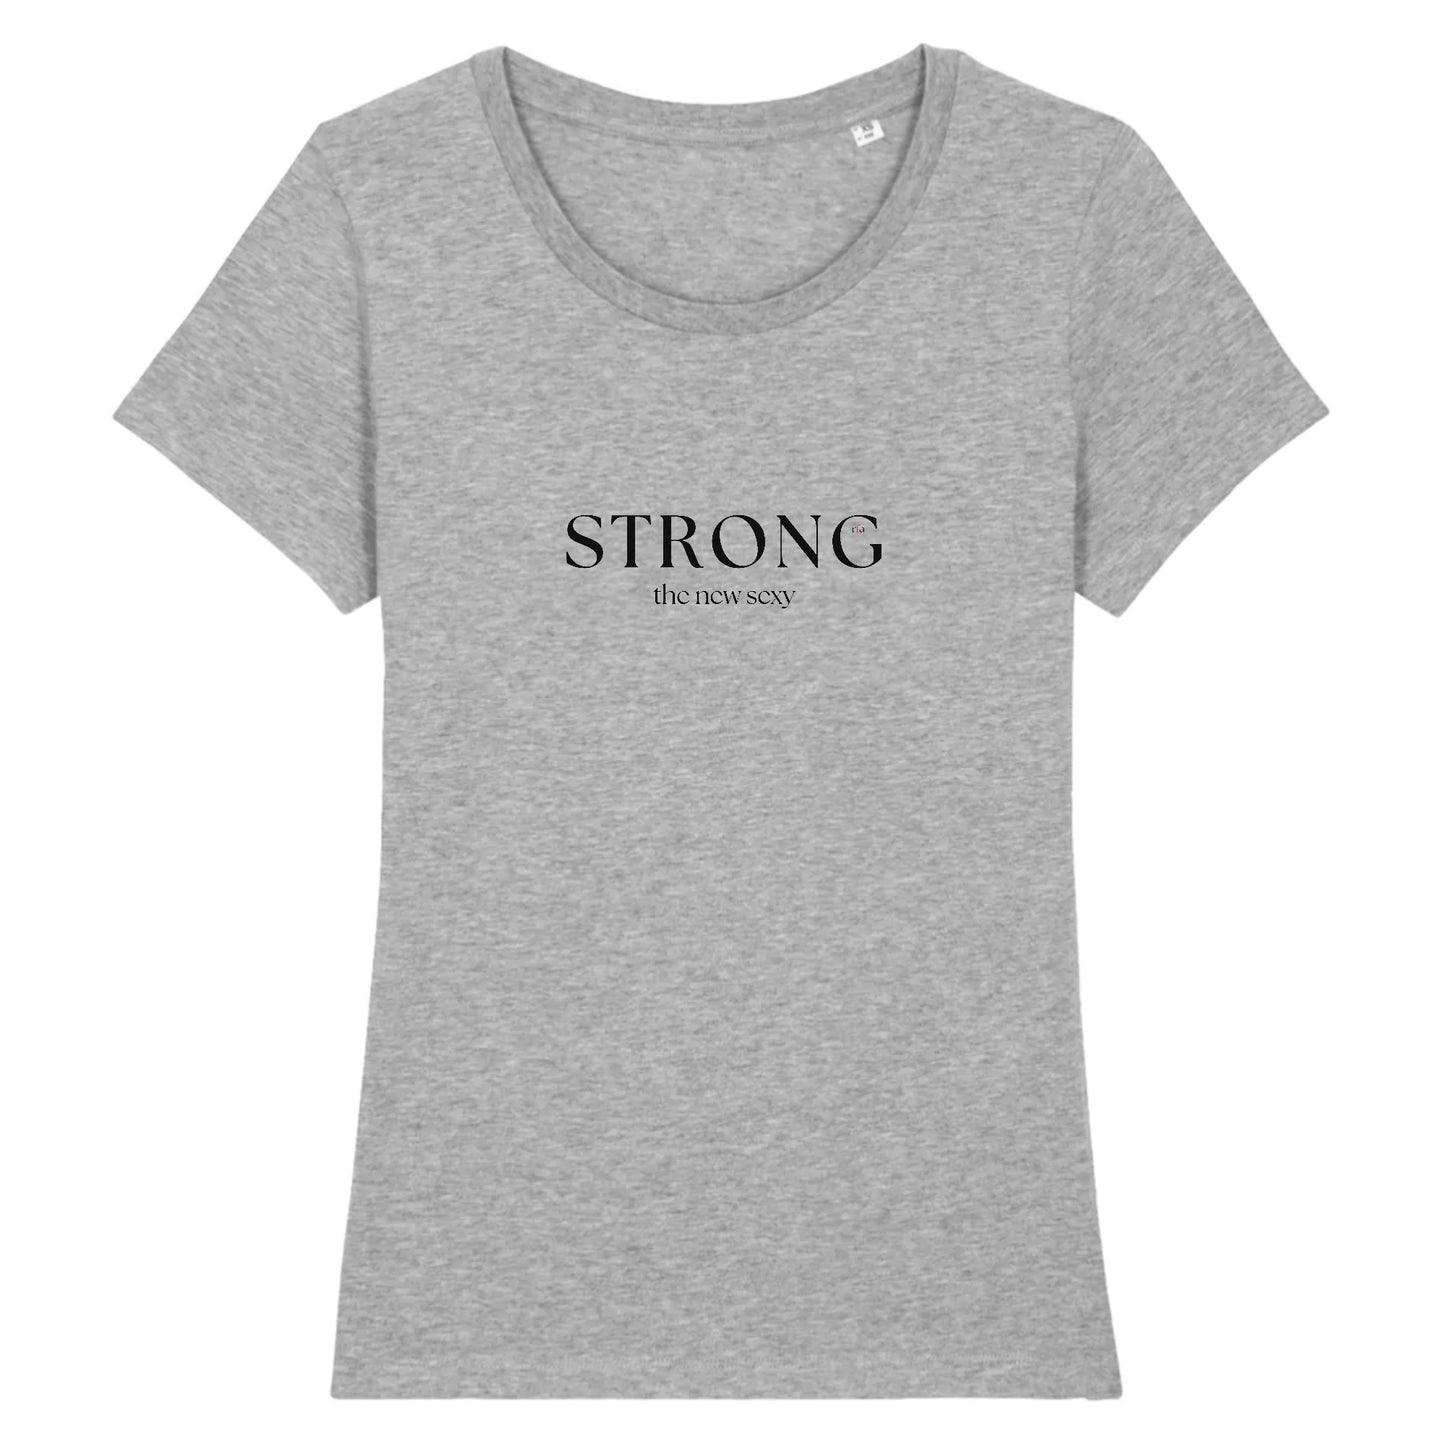 Classic Fitted Tee - STRONG SEXY Black STELLA - 100% Organic Cotton